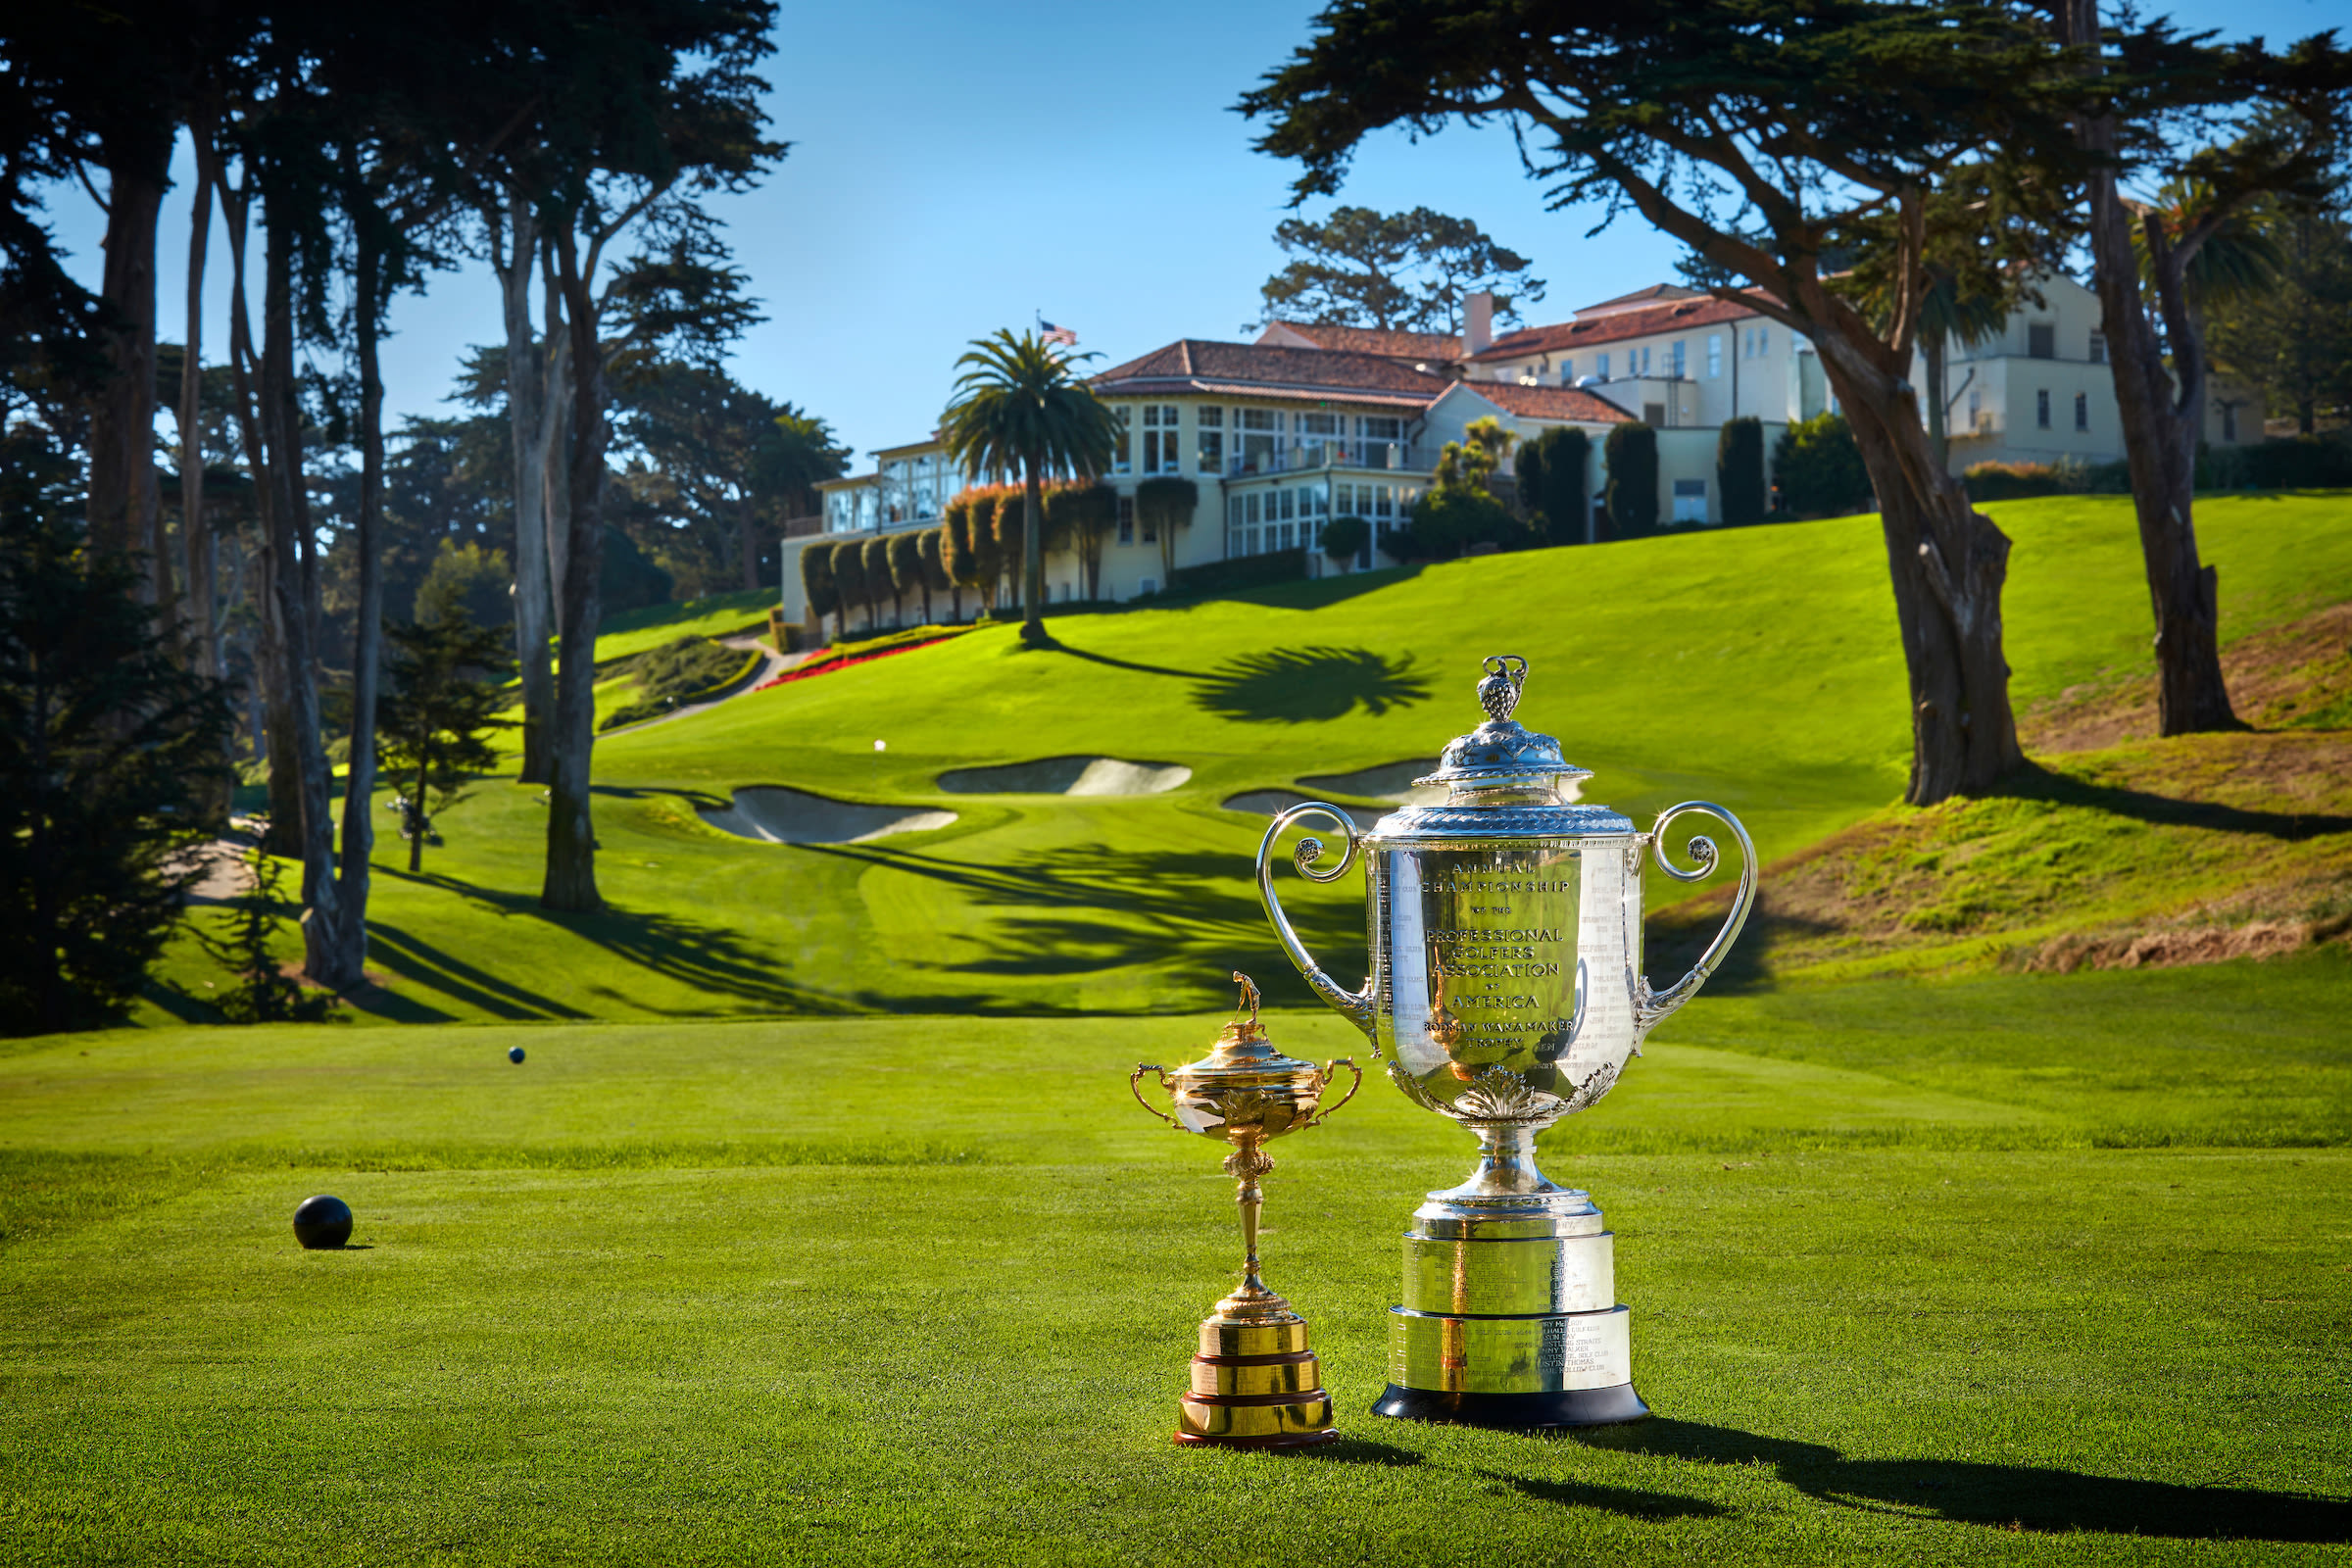 The Olympic Club will host both the 2028 PGA Championship and 2032 Ryder Cup.